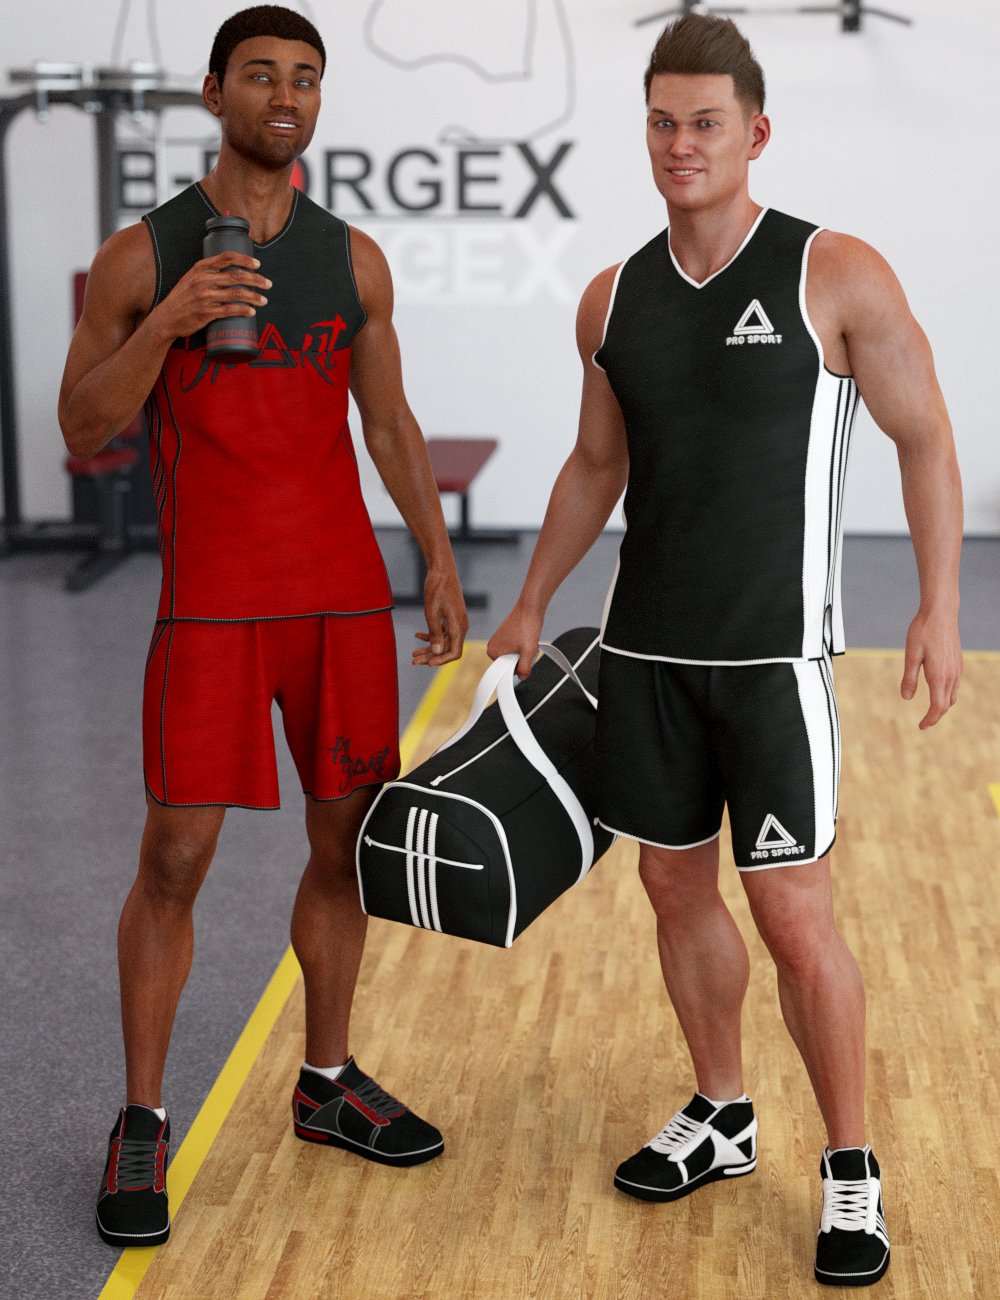 dForce Workout Outfit Textures for Genesis 8 Male(s) by: DirtyFairy, 3D Models by Daz 3D